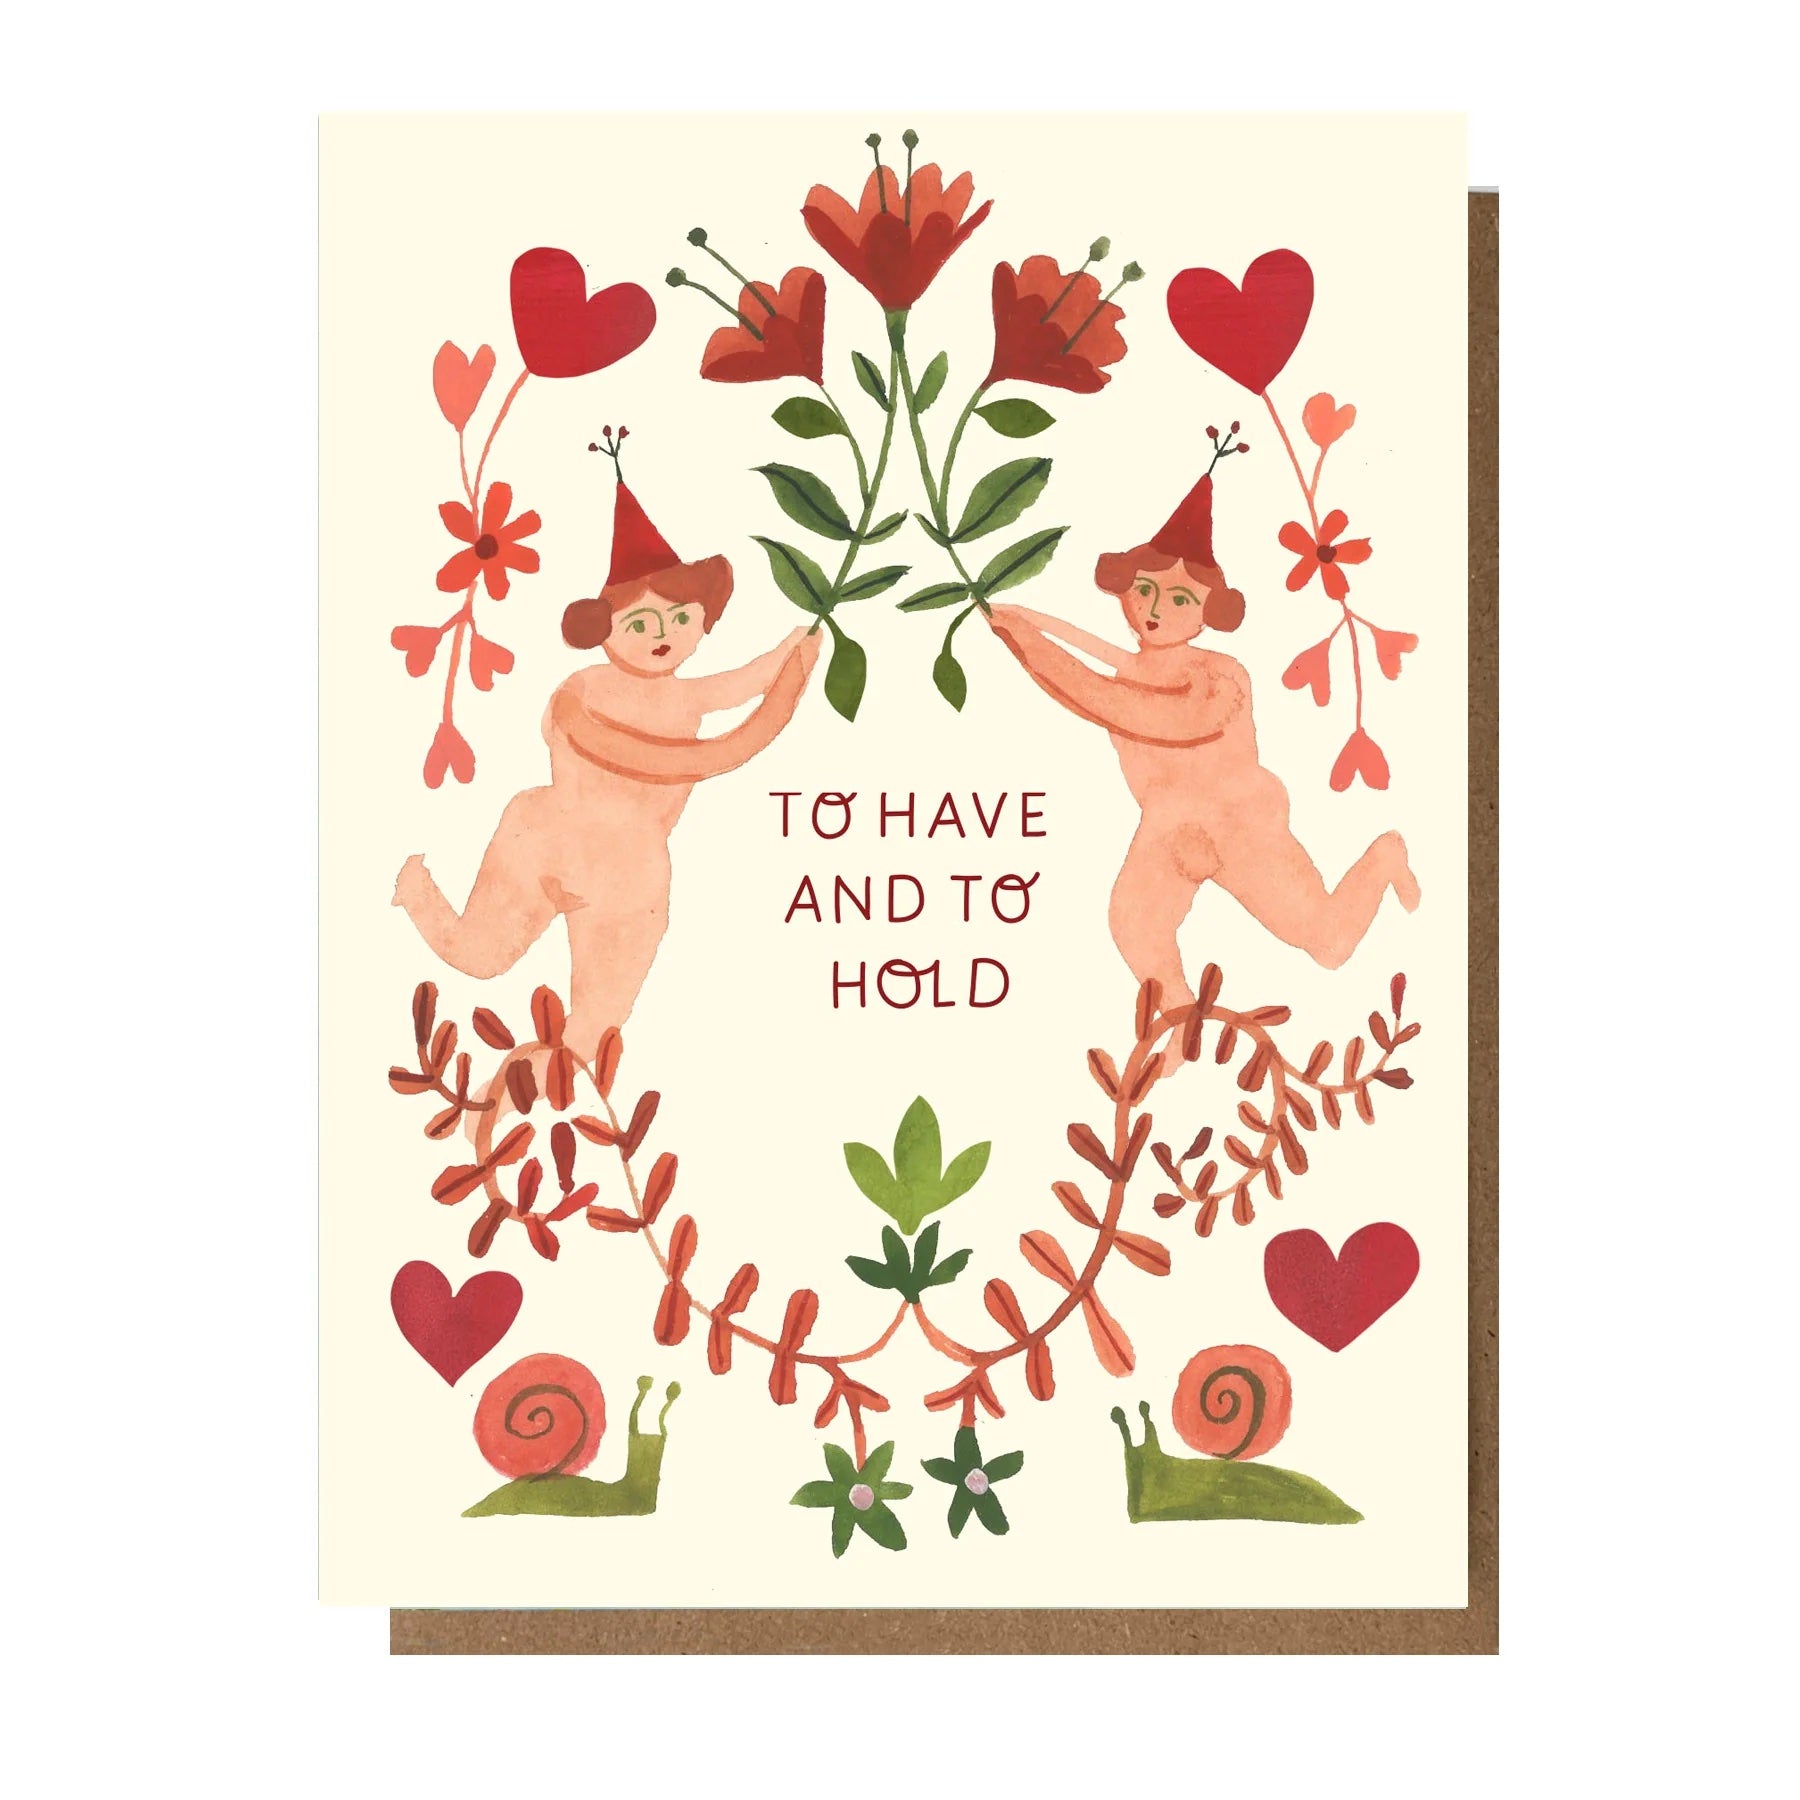 "To Have and To Hold" illustrated card featuring two spritely beings heralding flowers